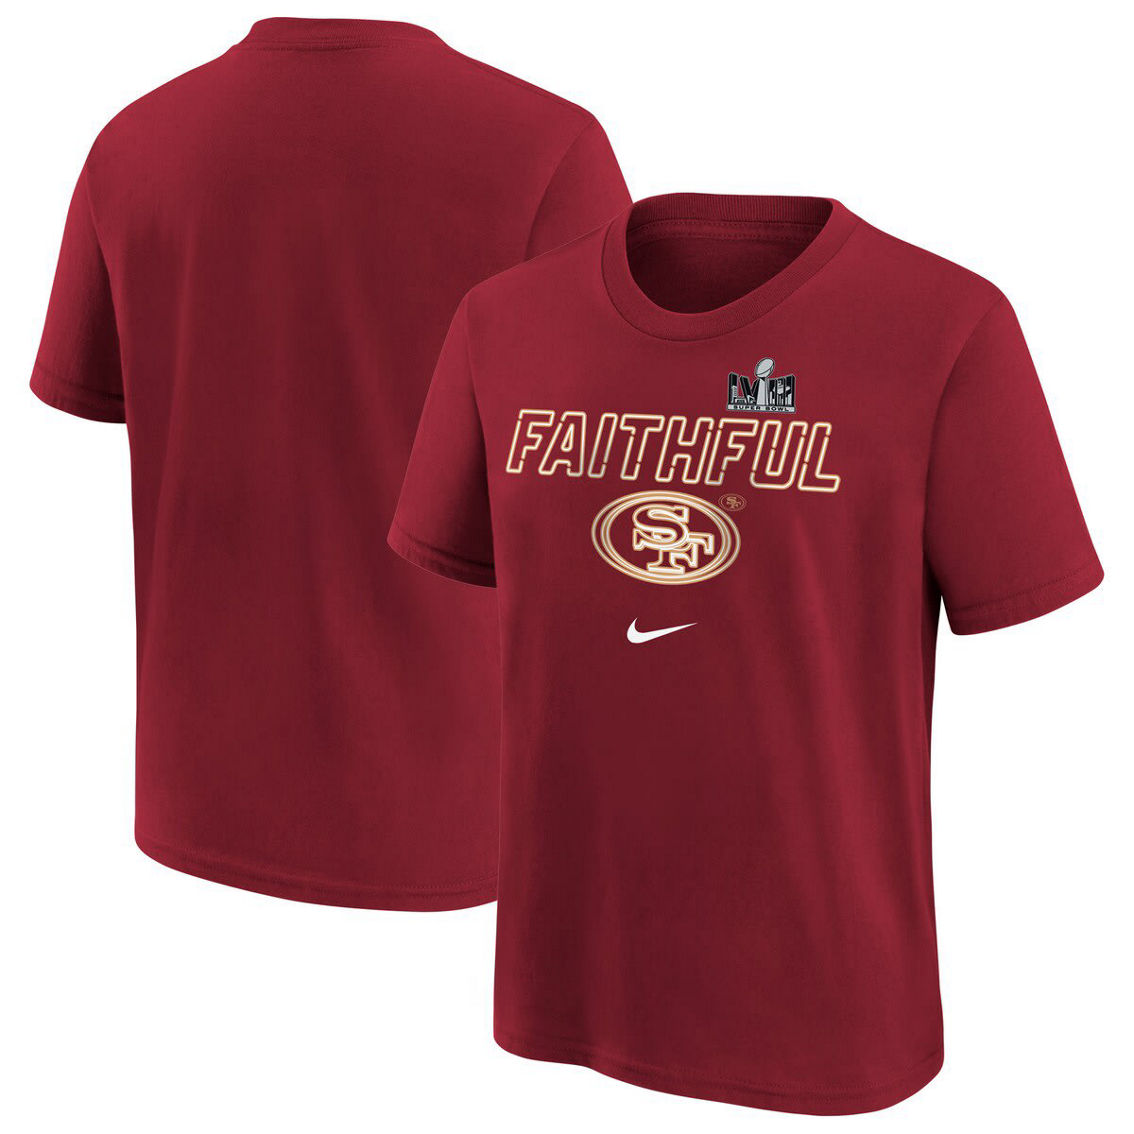 Nike Youth Scarlet San Francisco 49ers Super Bowl LVIII Local T-Shirt - Image 2 of 4